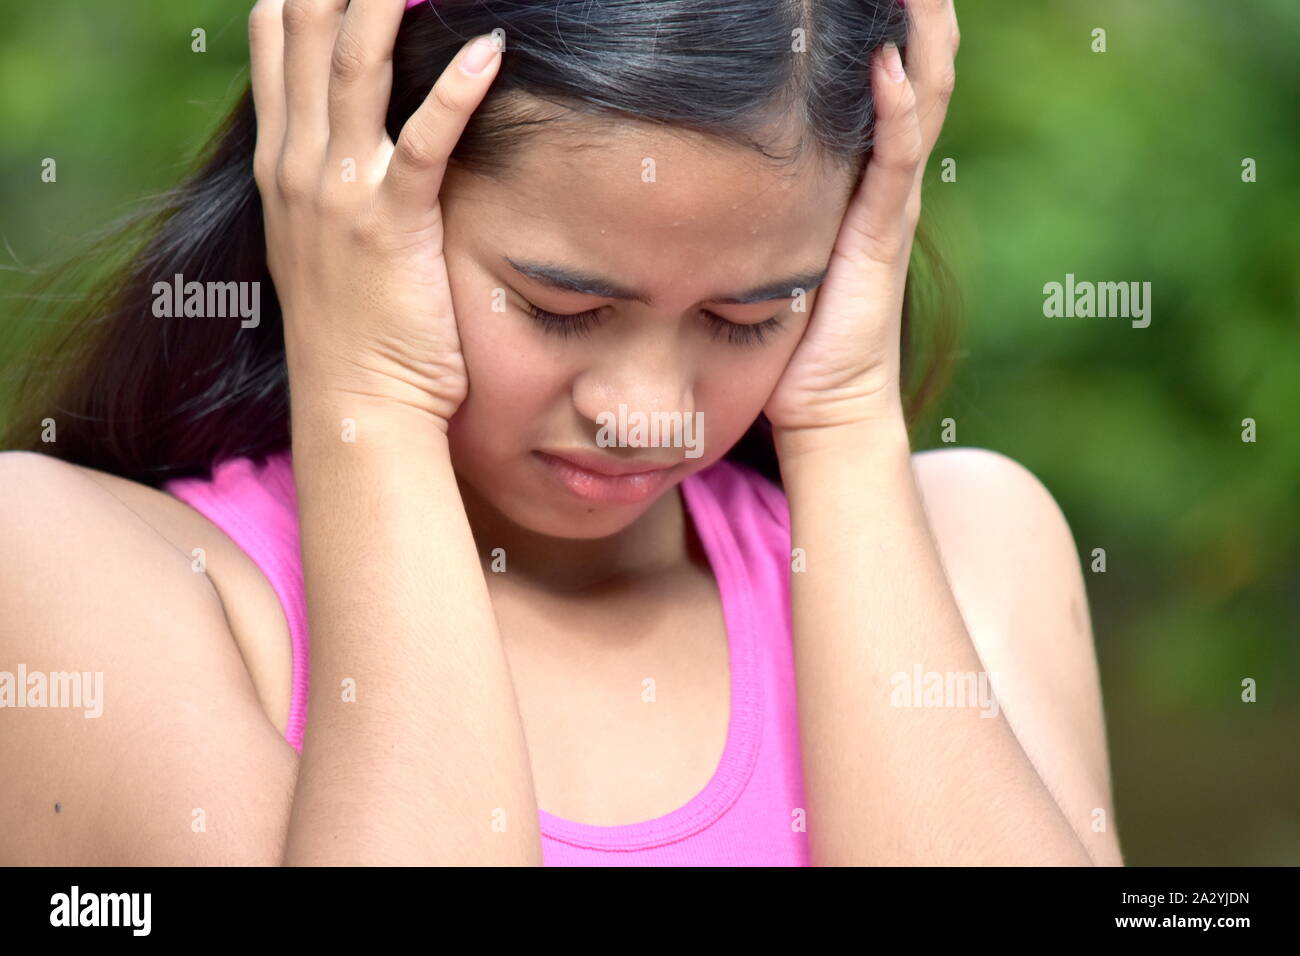 An A Stressed Youthful Female Juvenile Stock Photo